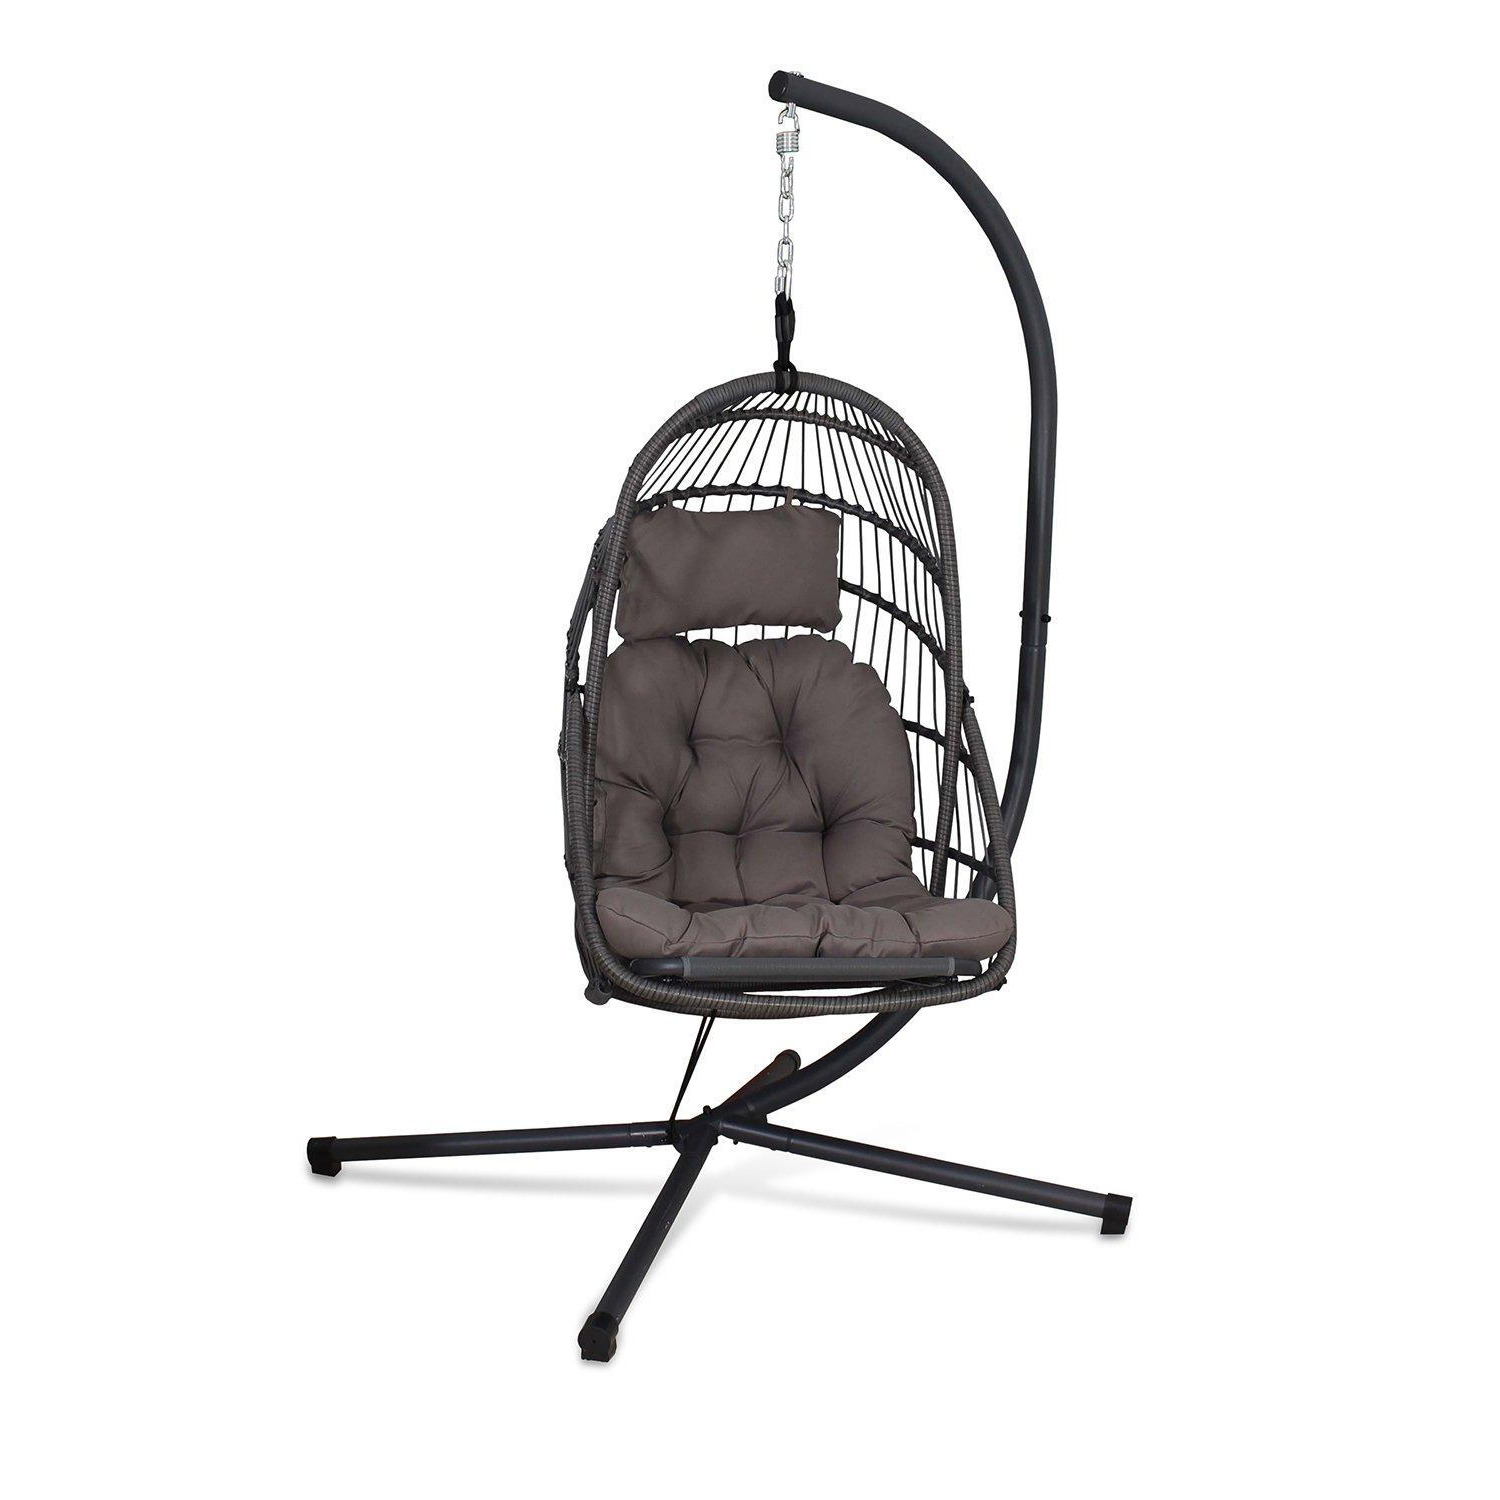 Relaxer Hanging Rattan Pod Chair - image 1